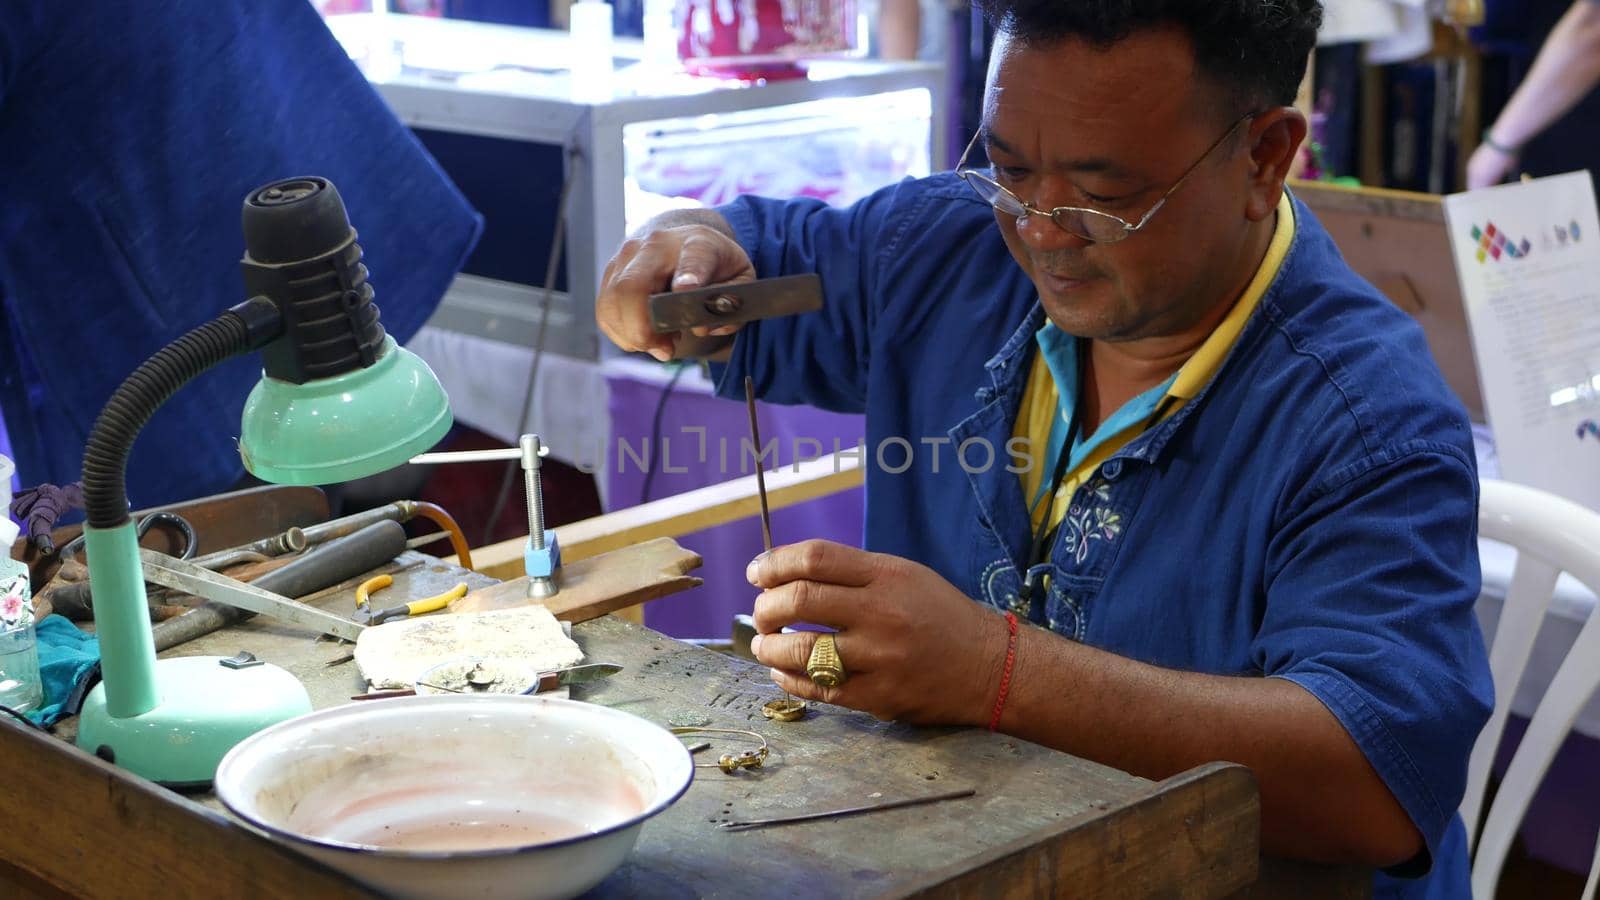 BANGKOK, THAILAND - 10 JULY, 2019: Ethnic jeweler working during exhibition. Ethnic craftsman in glasses sitting at shabby table and making jewelry while taking part in trade show.